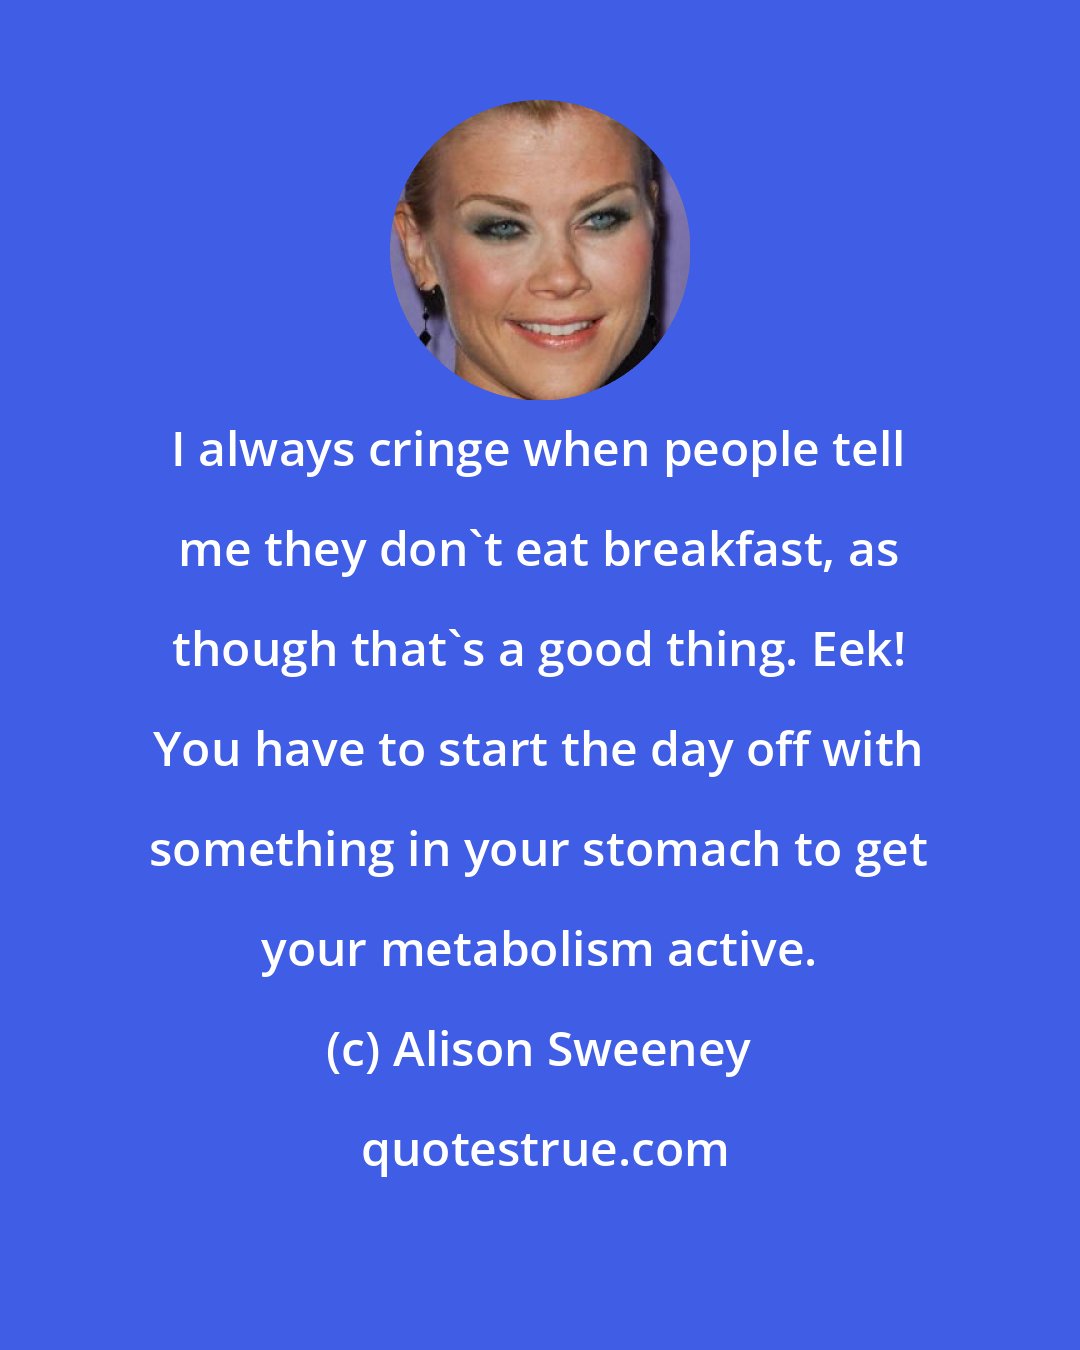 Alison Sweeney: I always cringe when people tell me they don't eat breakfast, as though that's a good thing. Eek! You have to start the day off with something in your stomach to get your metabolism active.